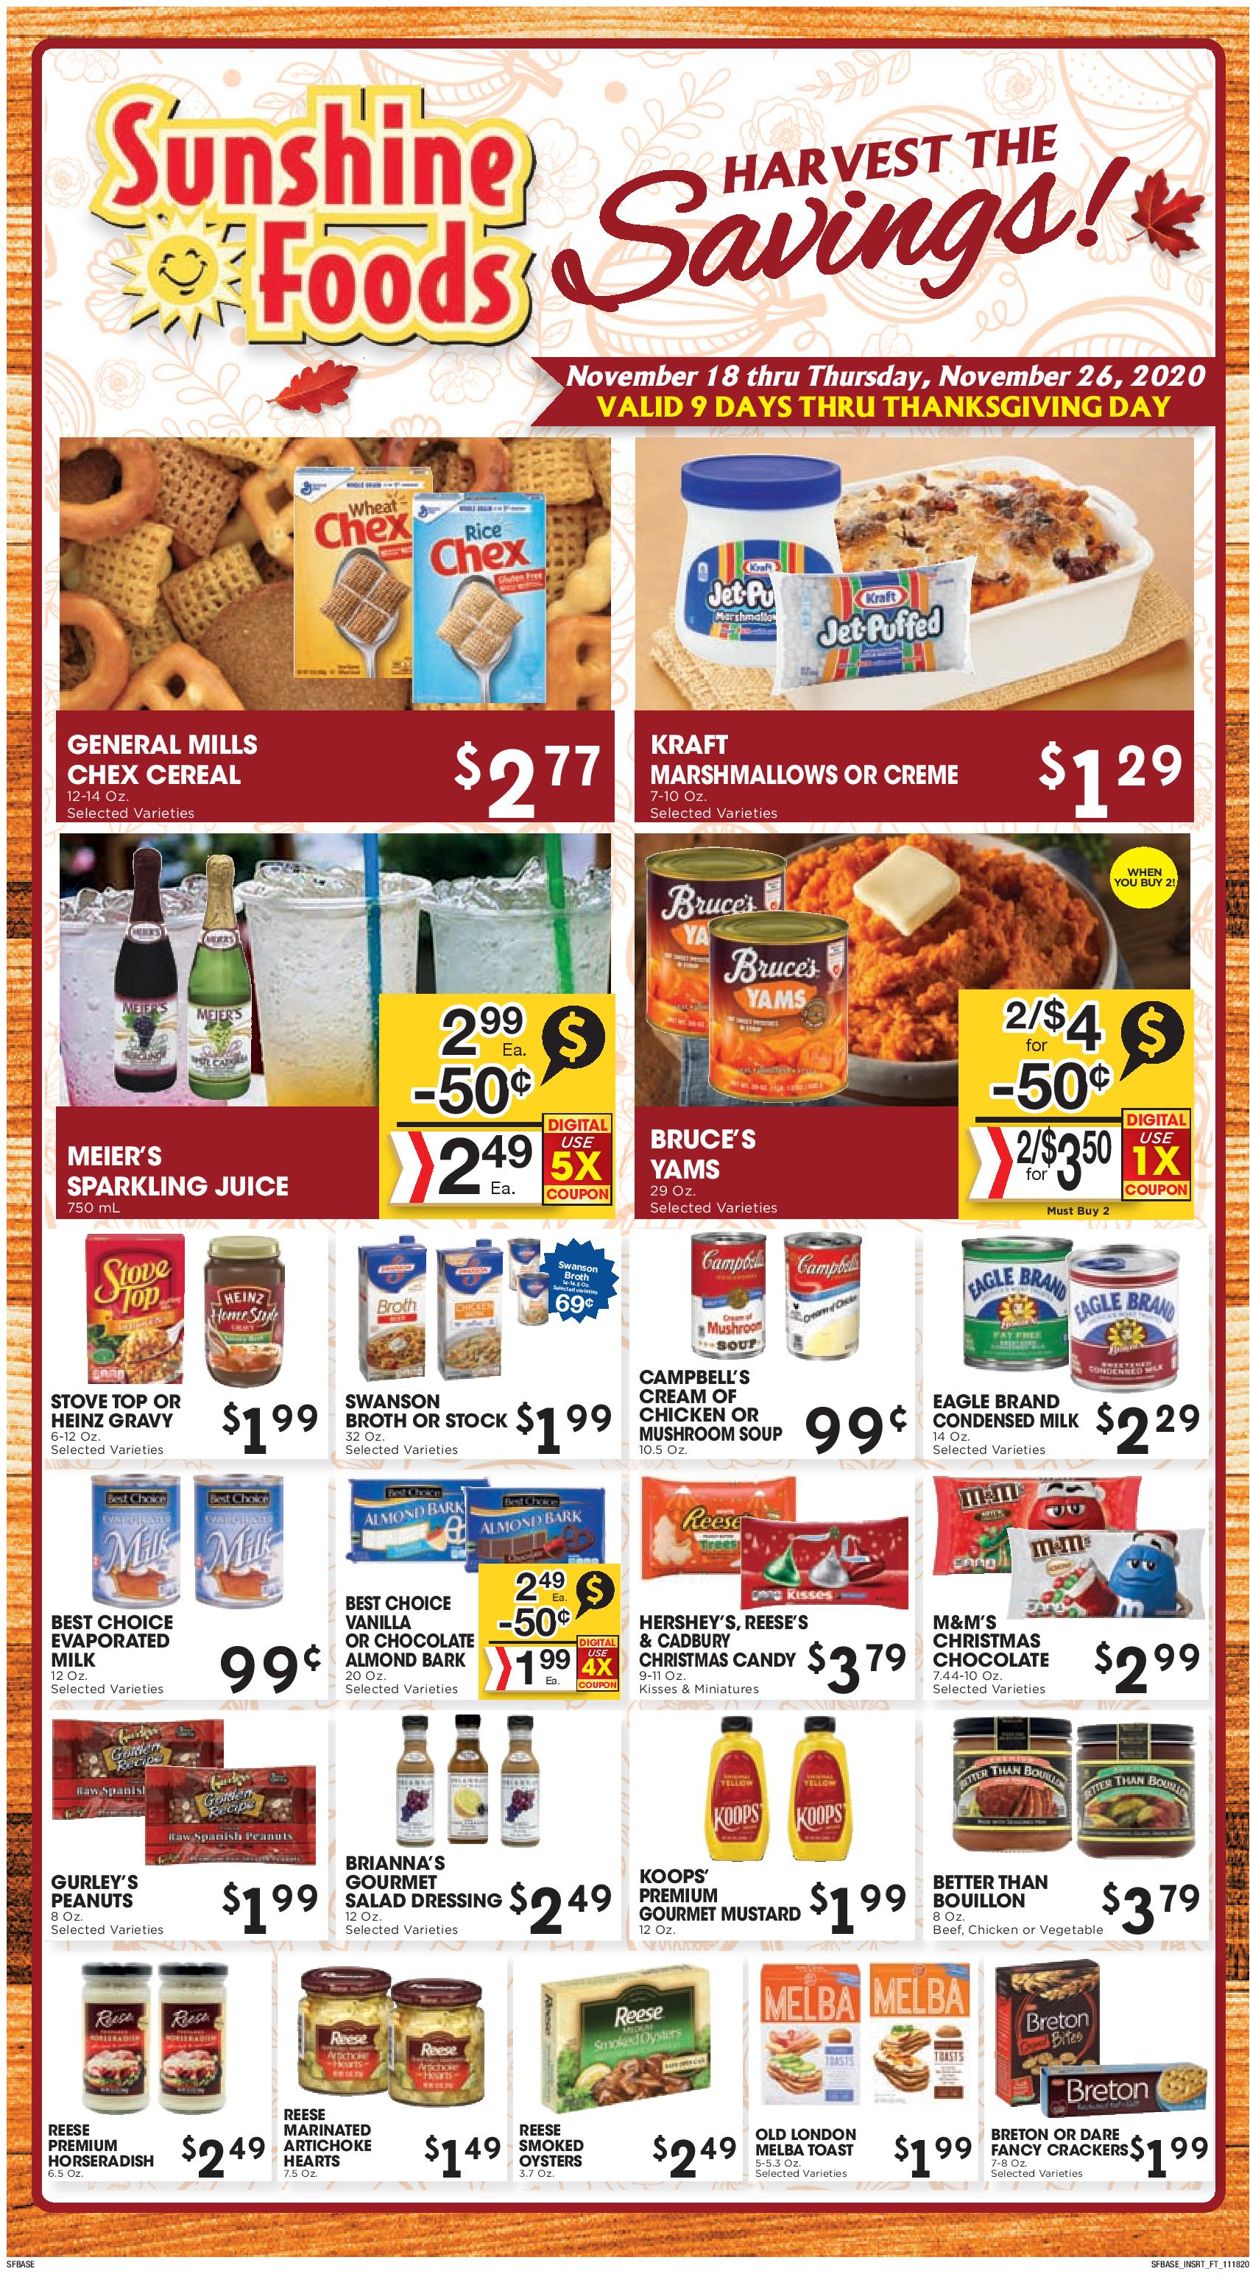 Catalogue Sunshine Foods Thanksgiving ad 2020 from 11/18/2020